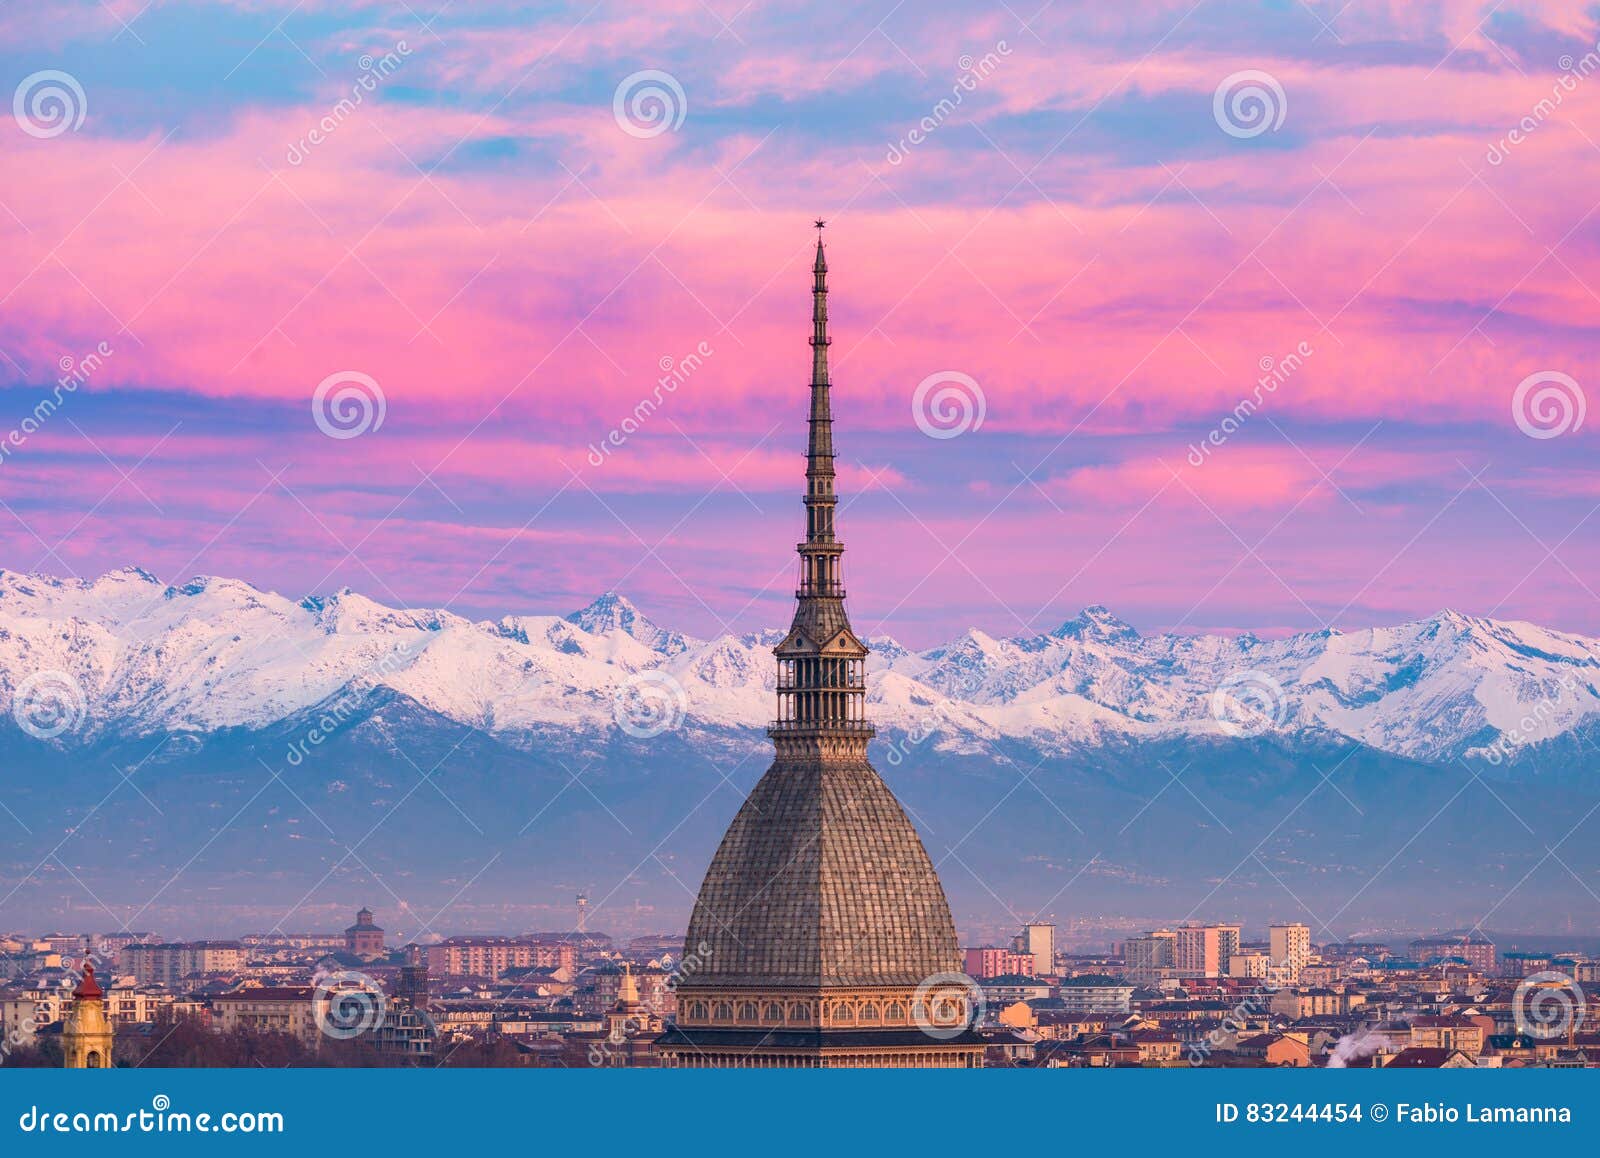 torino turin, italy: cityscape at sunrise with details of the mole antonelliana towering over the city. scenic colorful light on